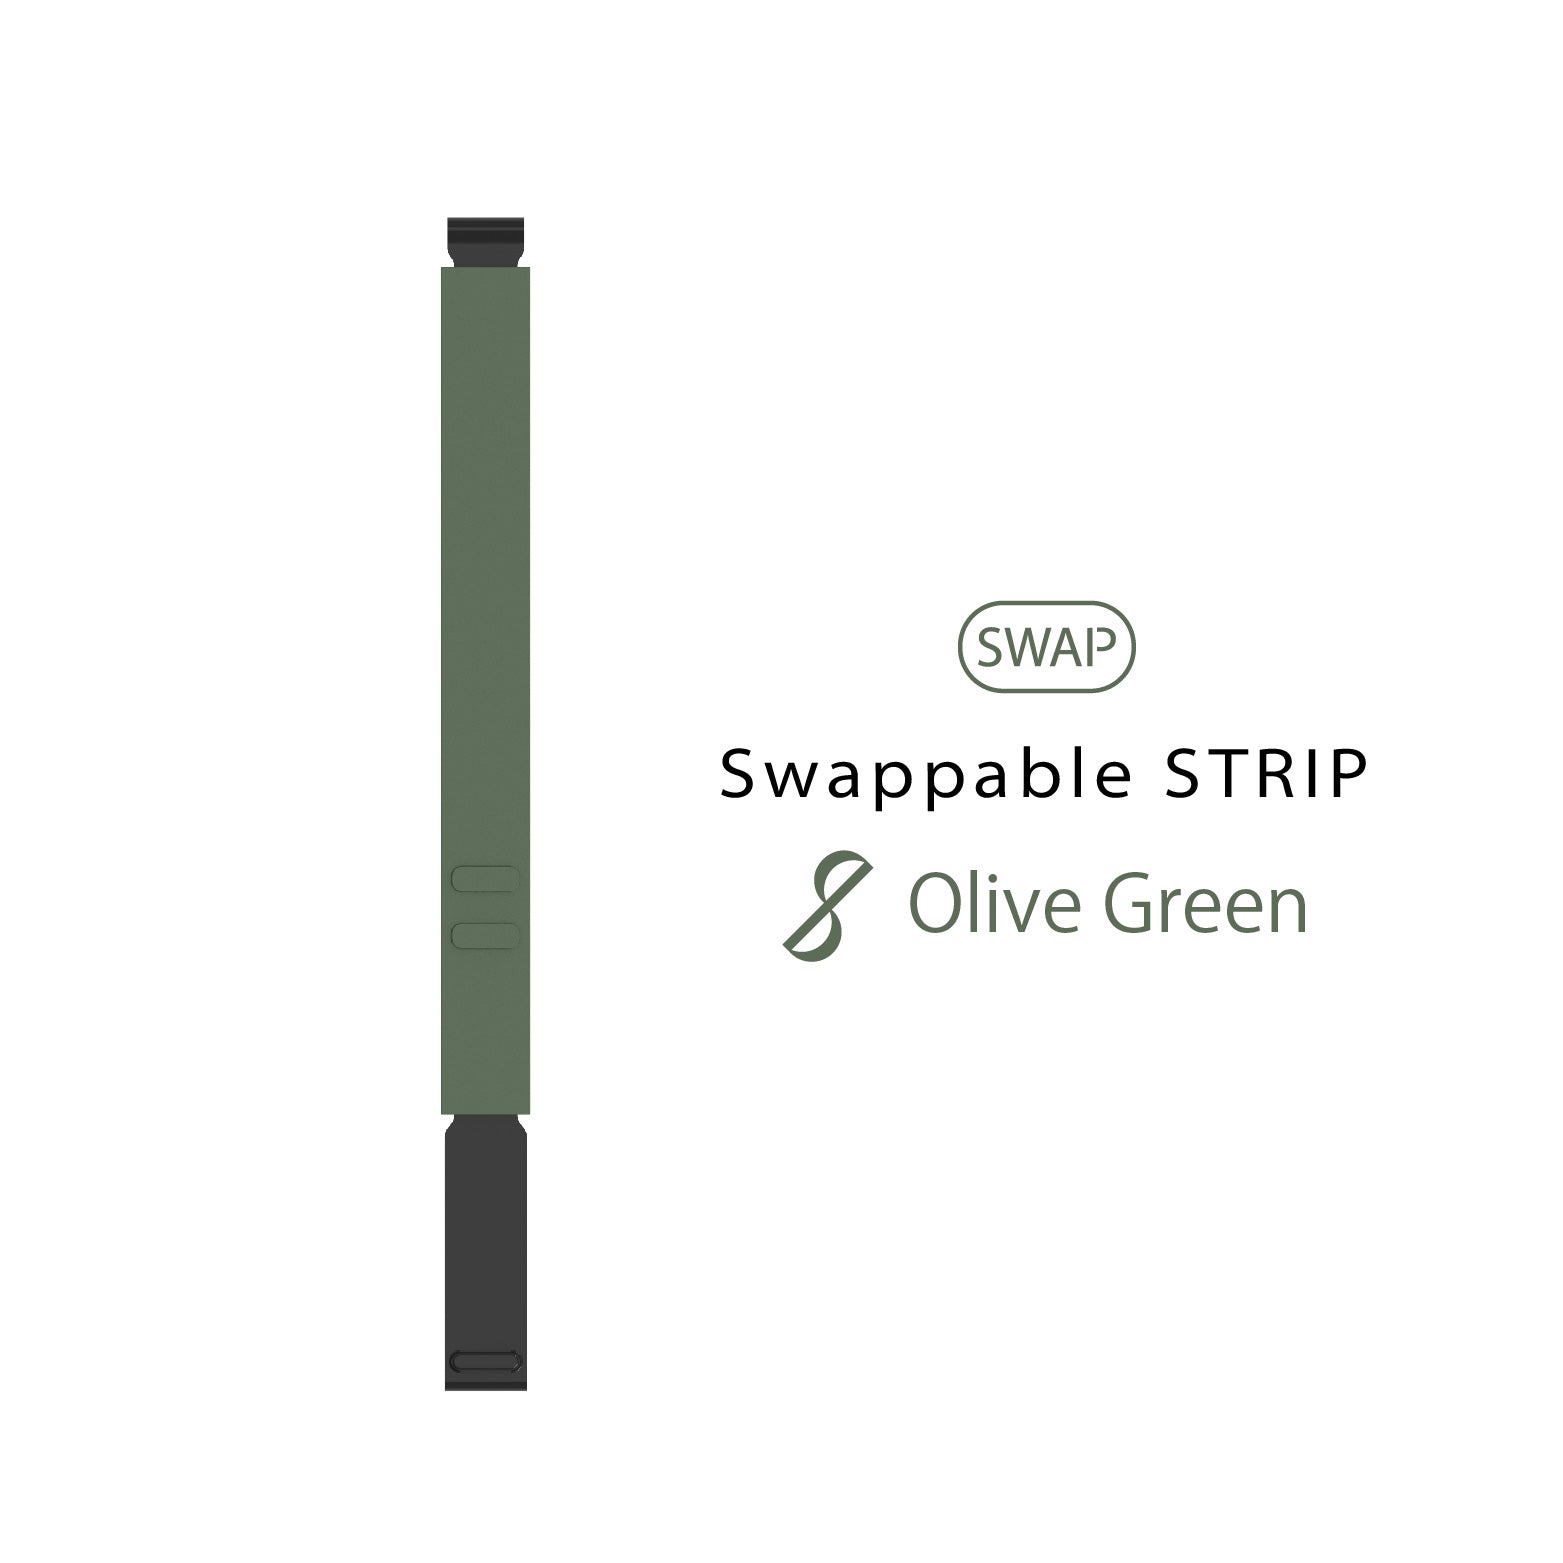 Swappable Strip: Olive Green